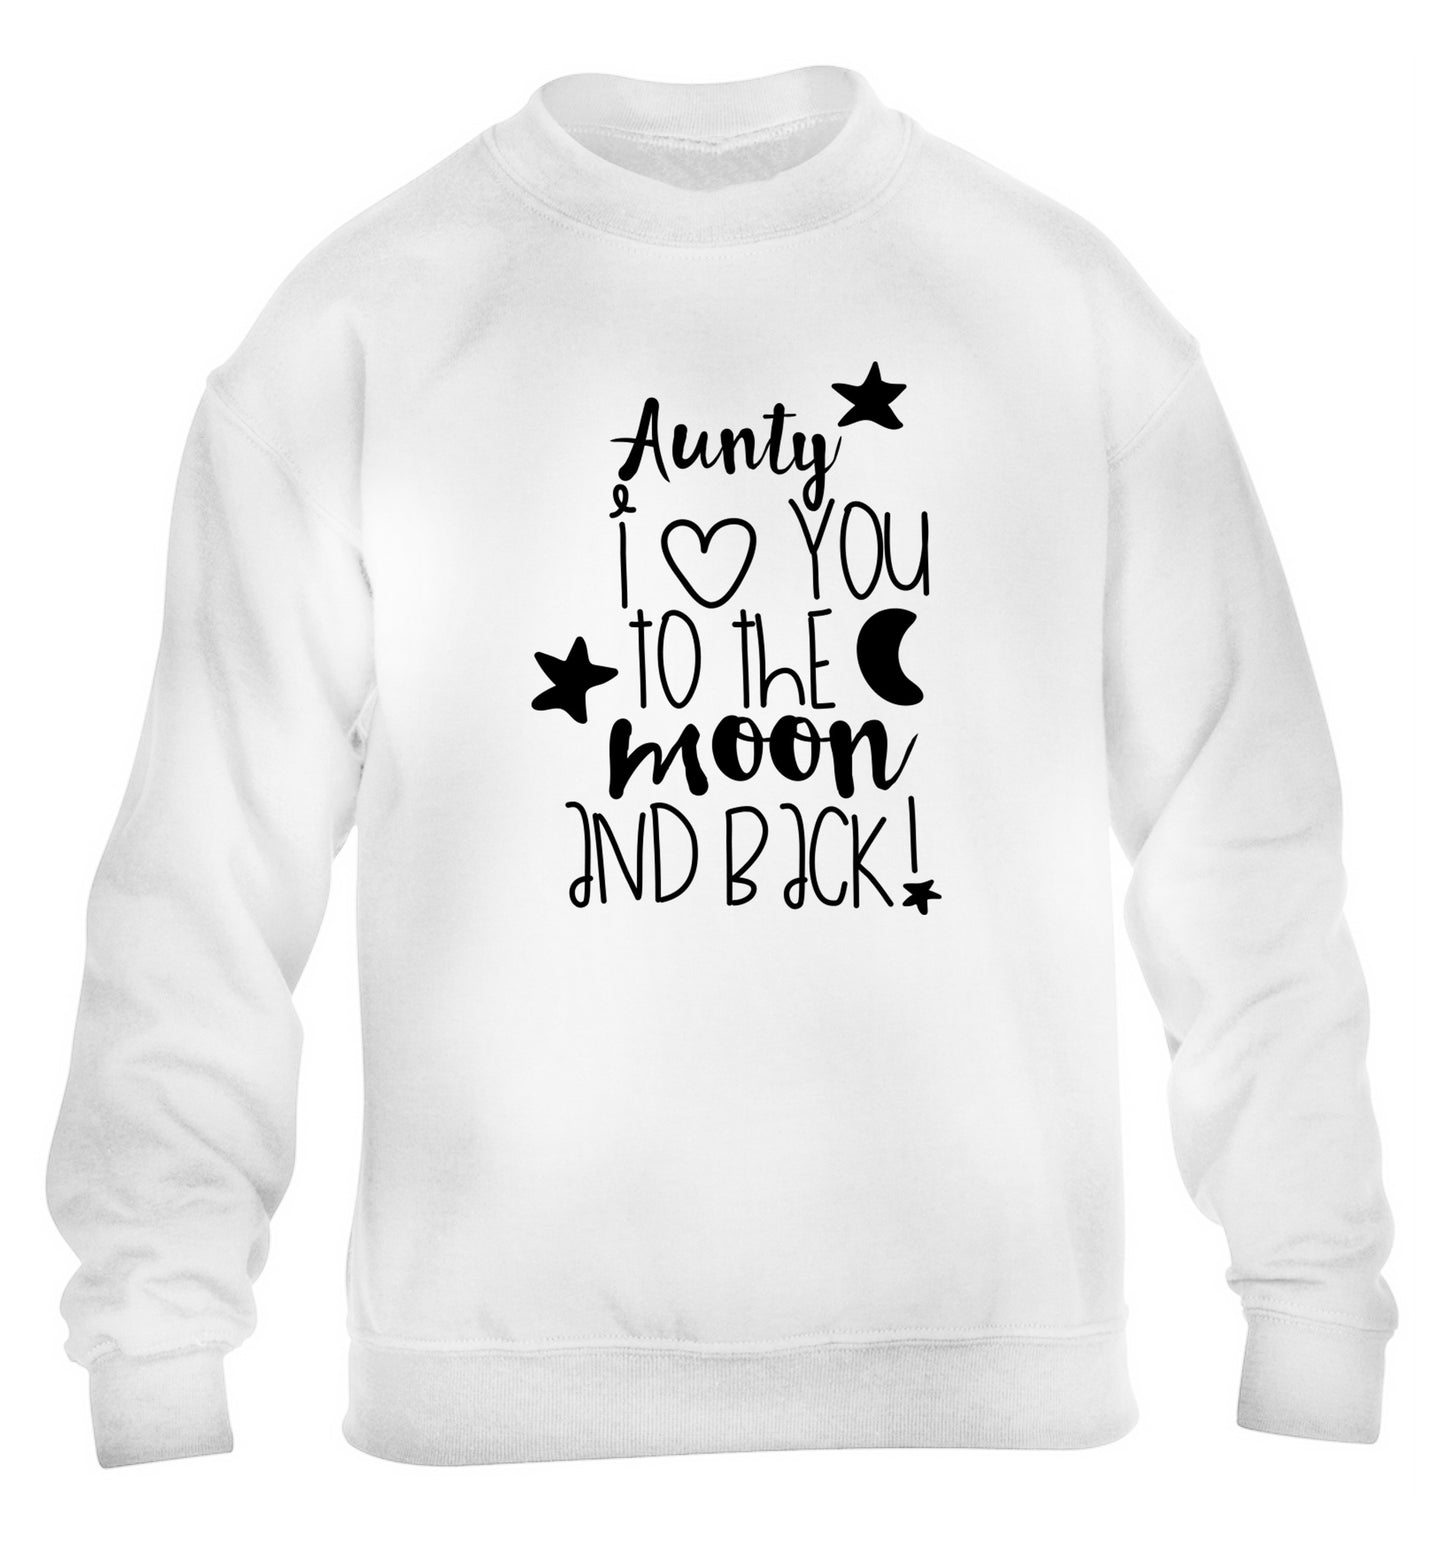 Aunty I love you to the moon and back children's white  sweater 12-14 Years